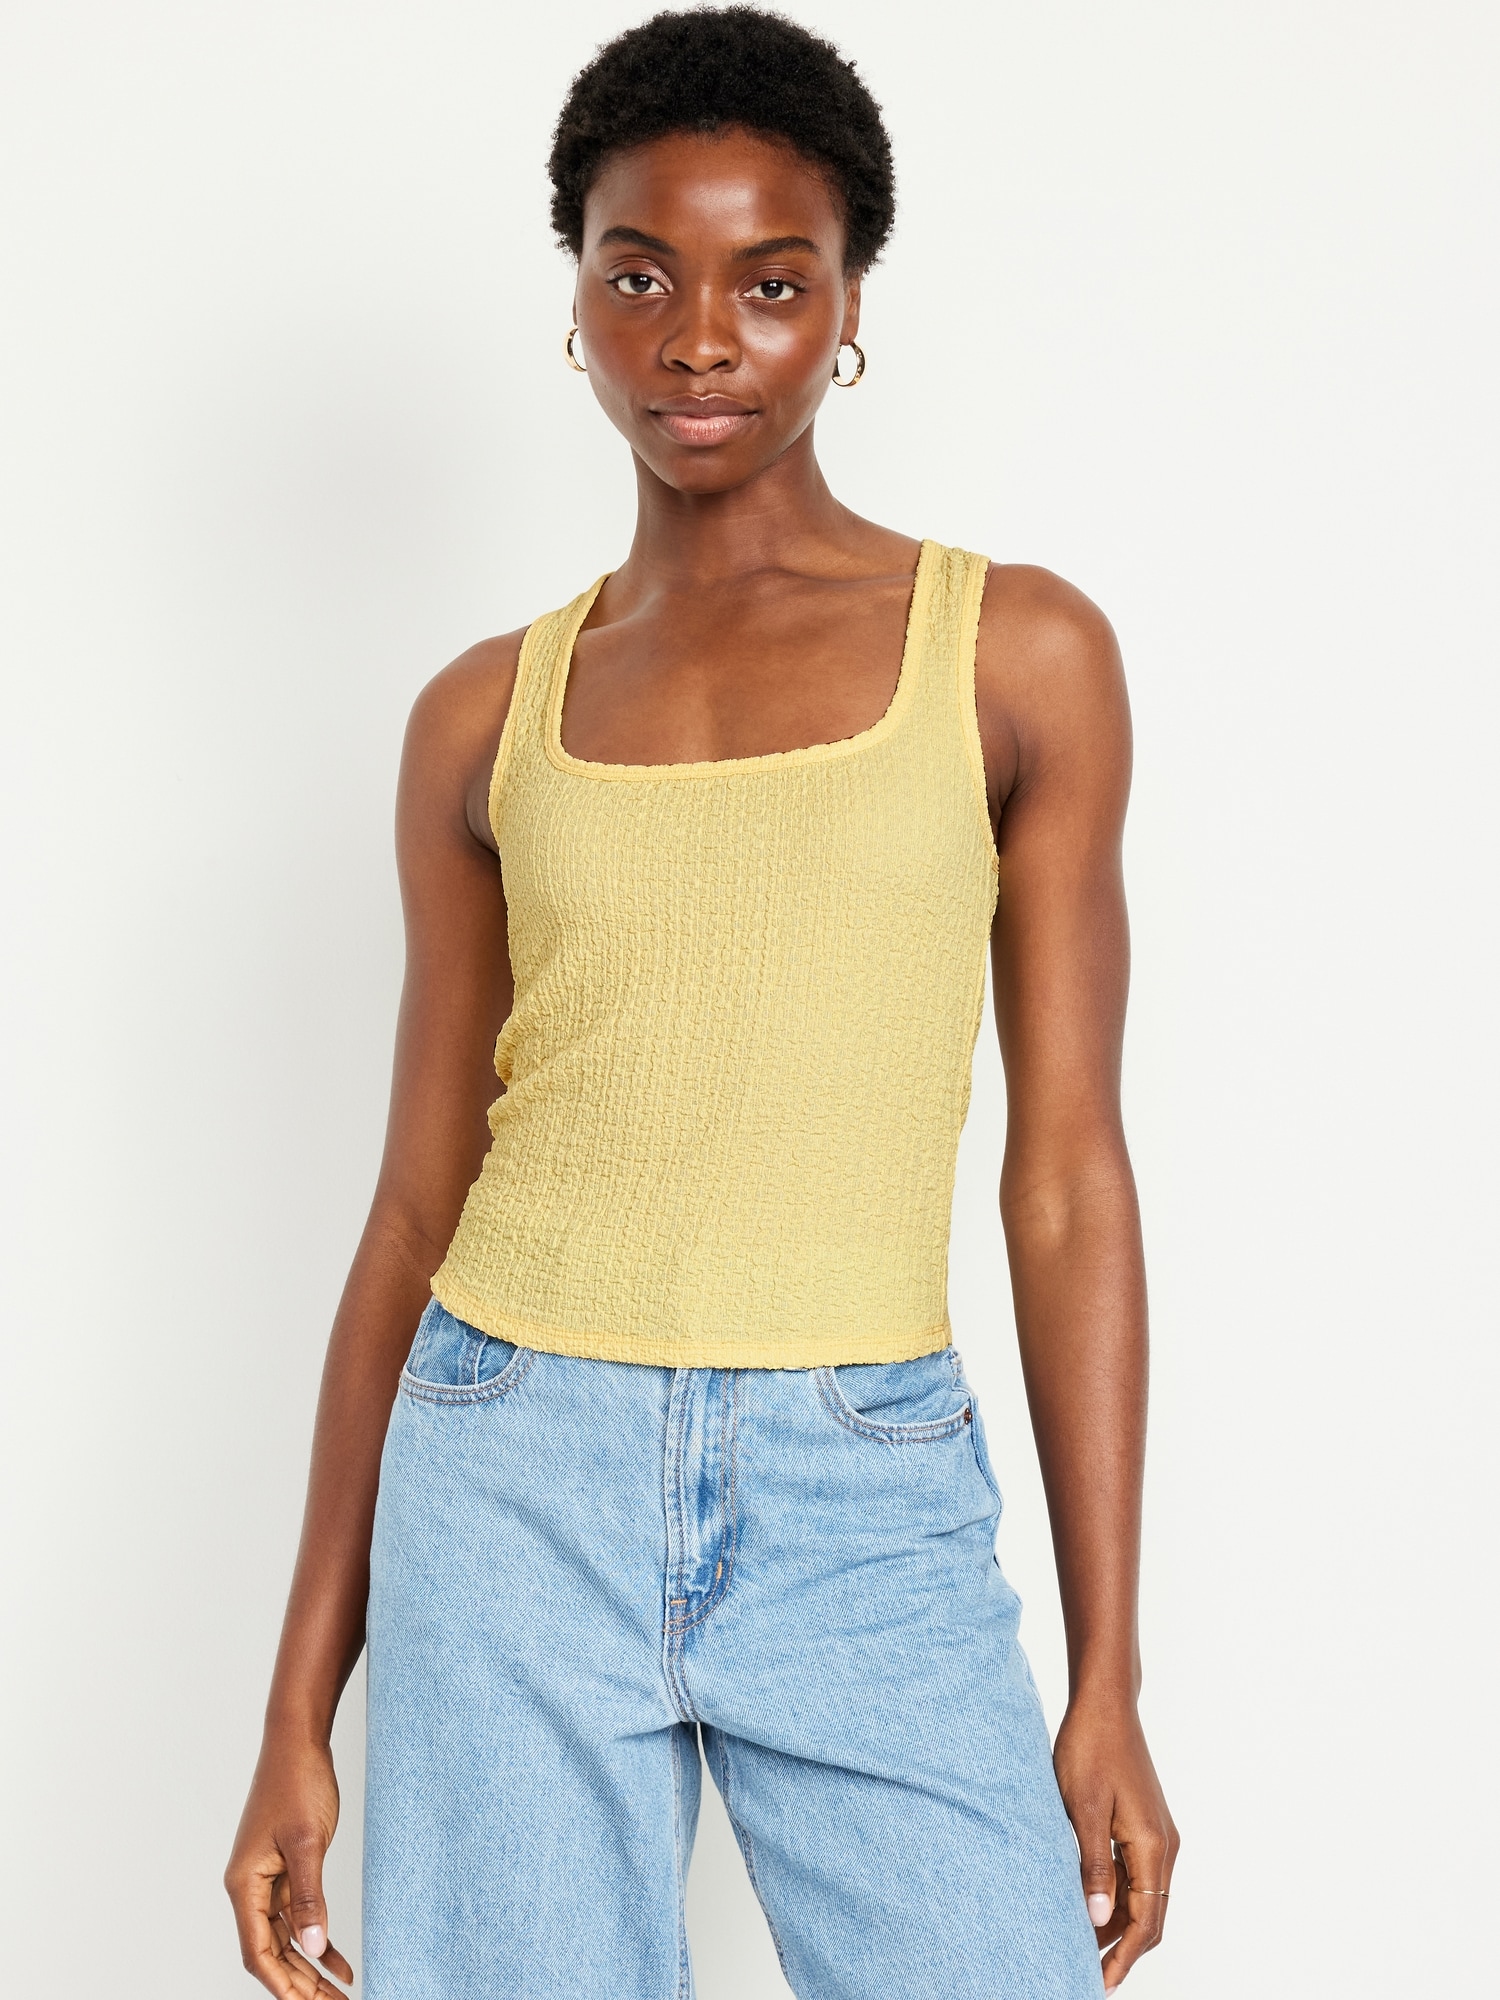 Square-Neck Textured Top Hot Deal